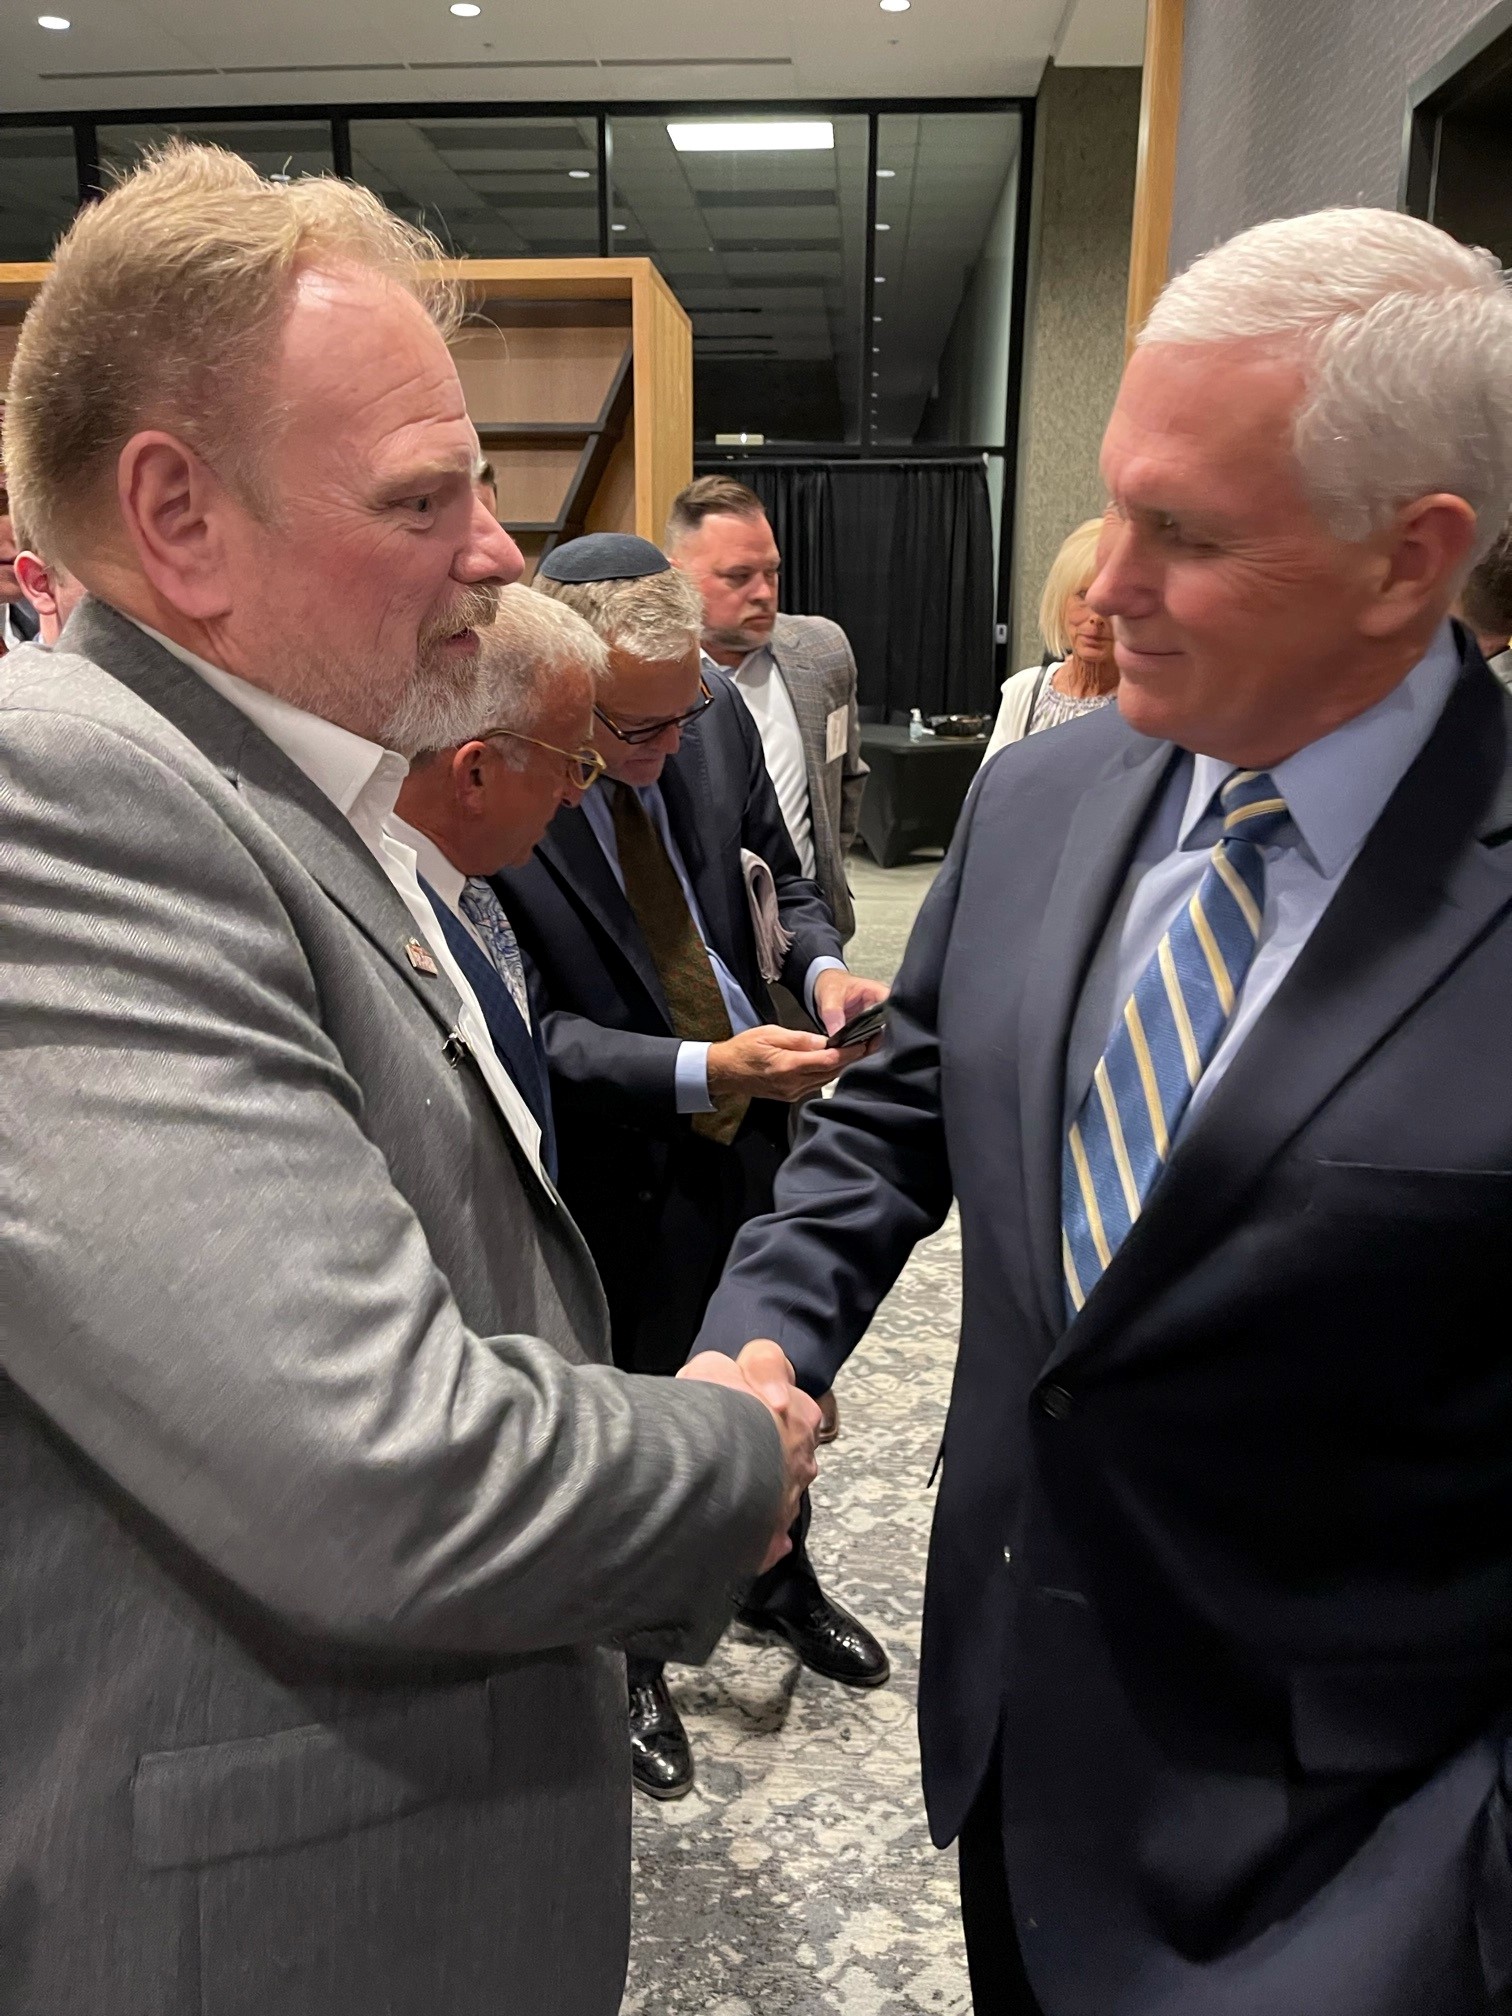 Steve McMichael shaking Mike Pence's hand